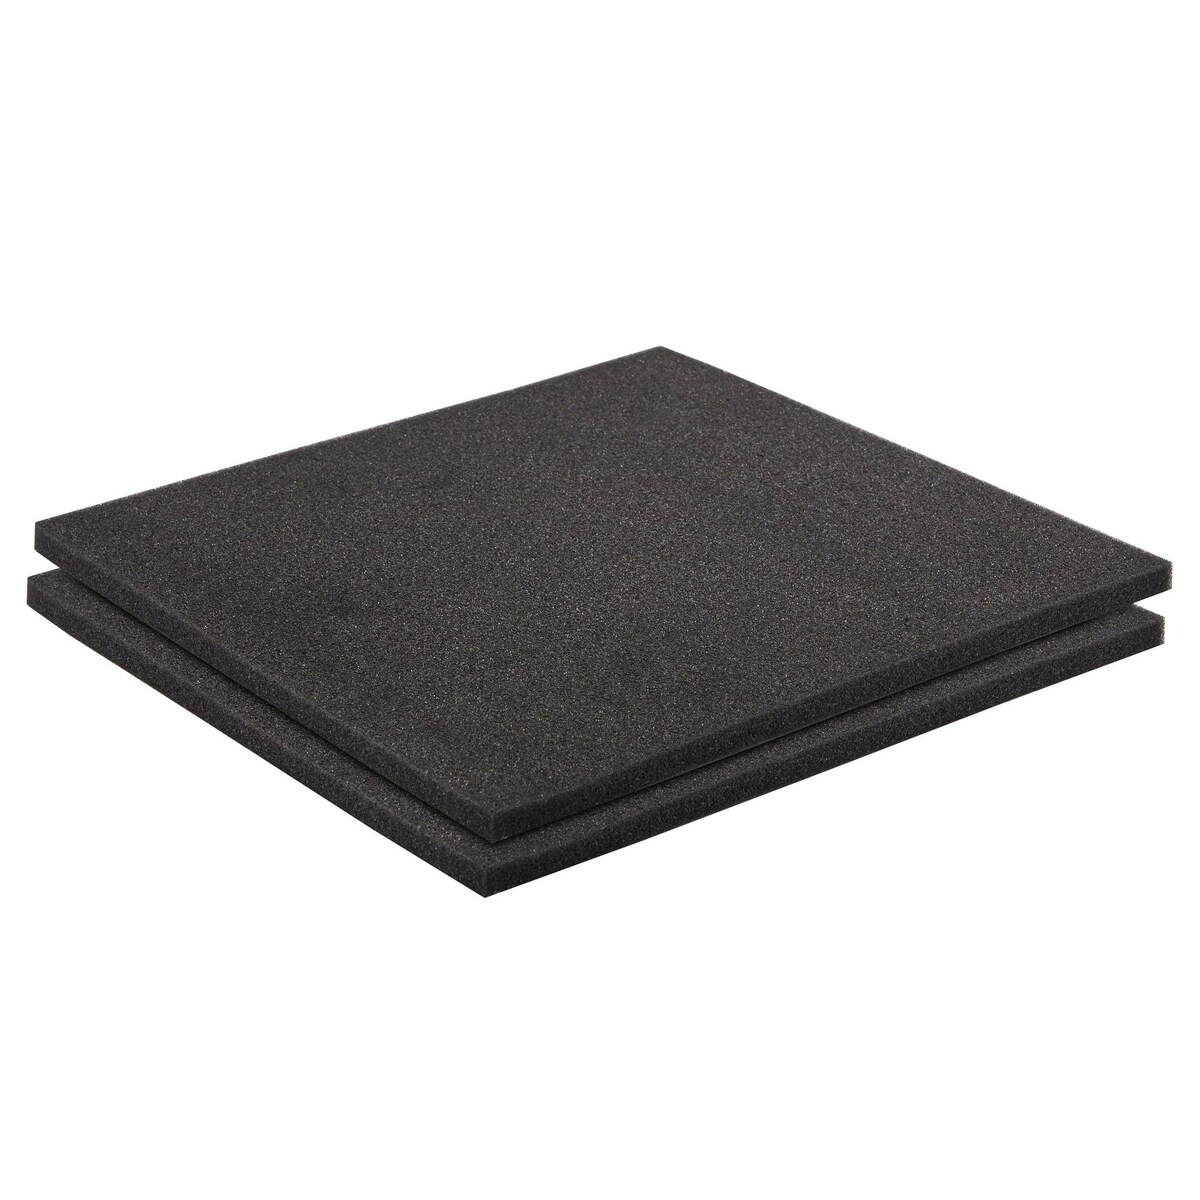 Customizable Polyurethane Foam, 0.5 Inch Pads for Packing and